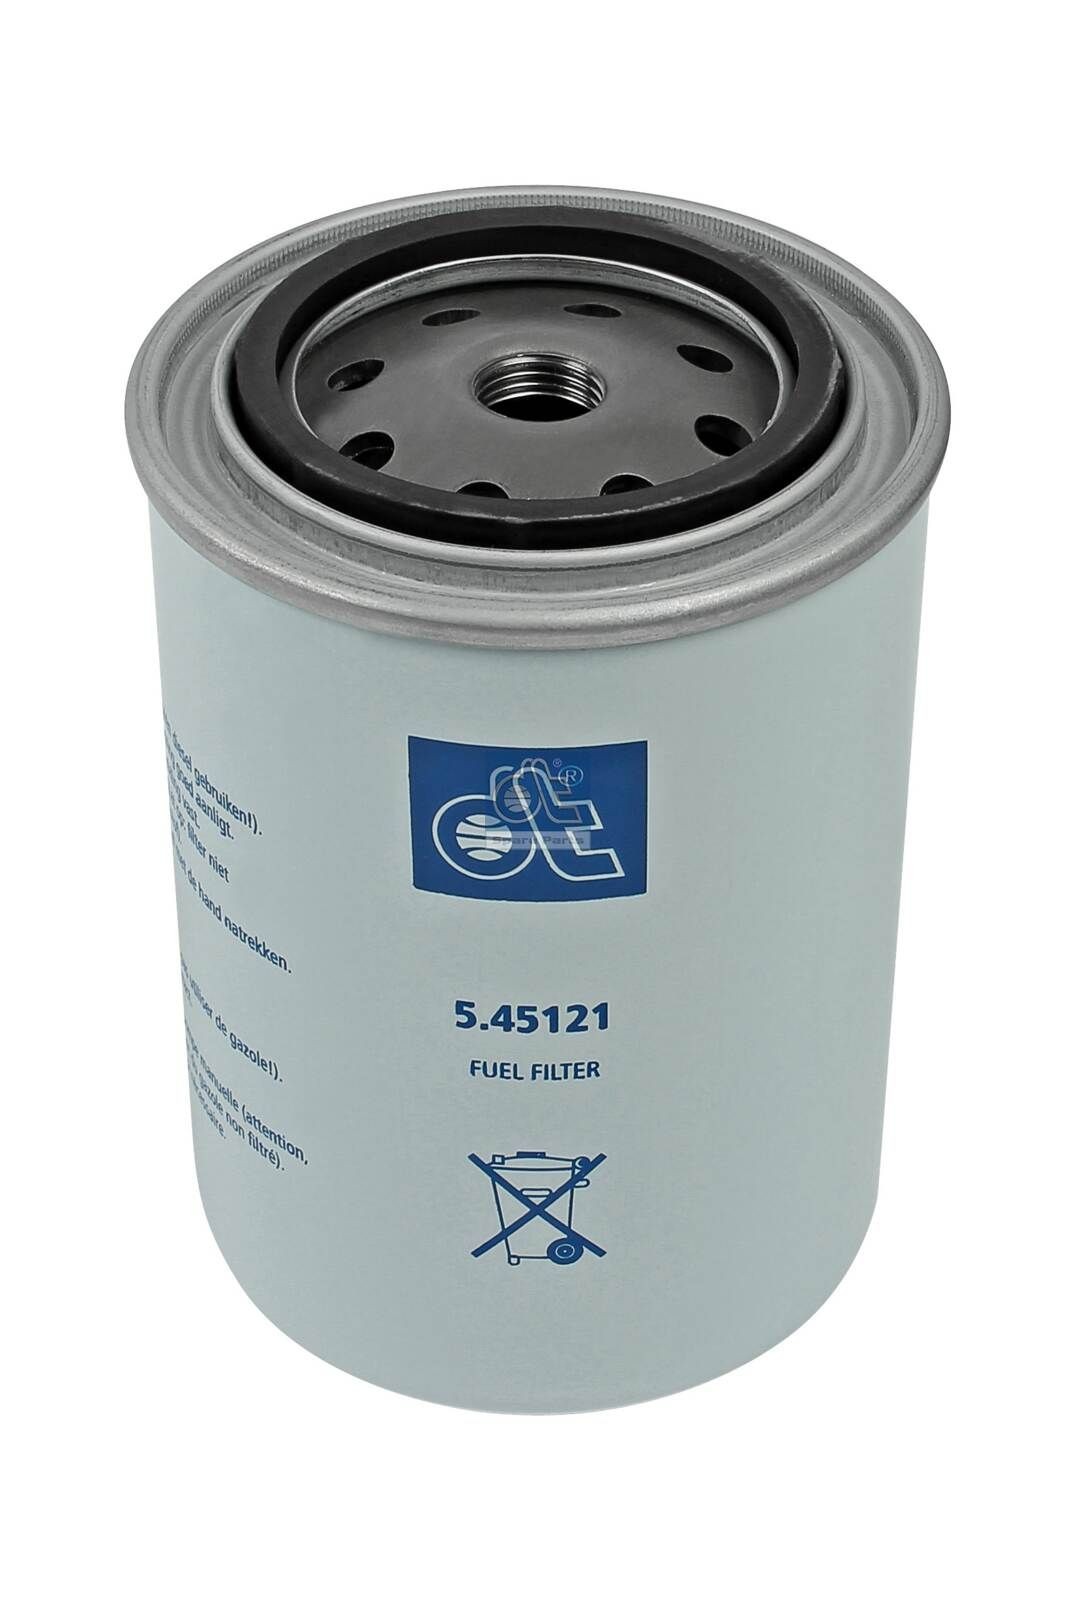 WDK 940/5 DT Spare Parts 5.45121 Fuel filter 190 2133